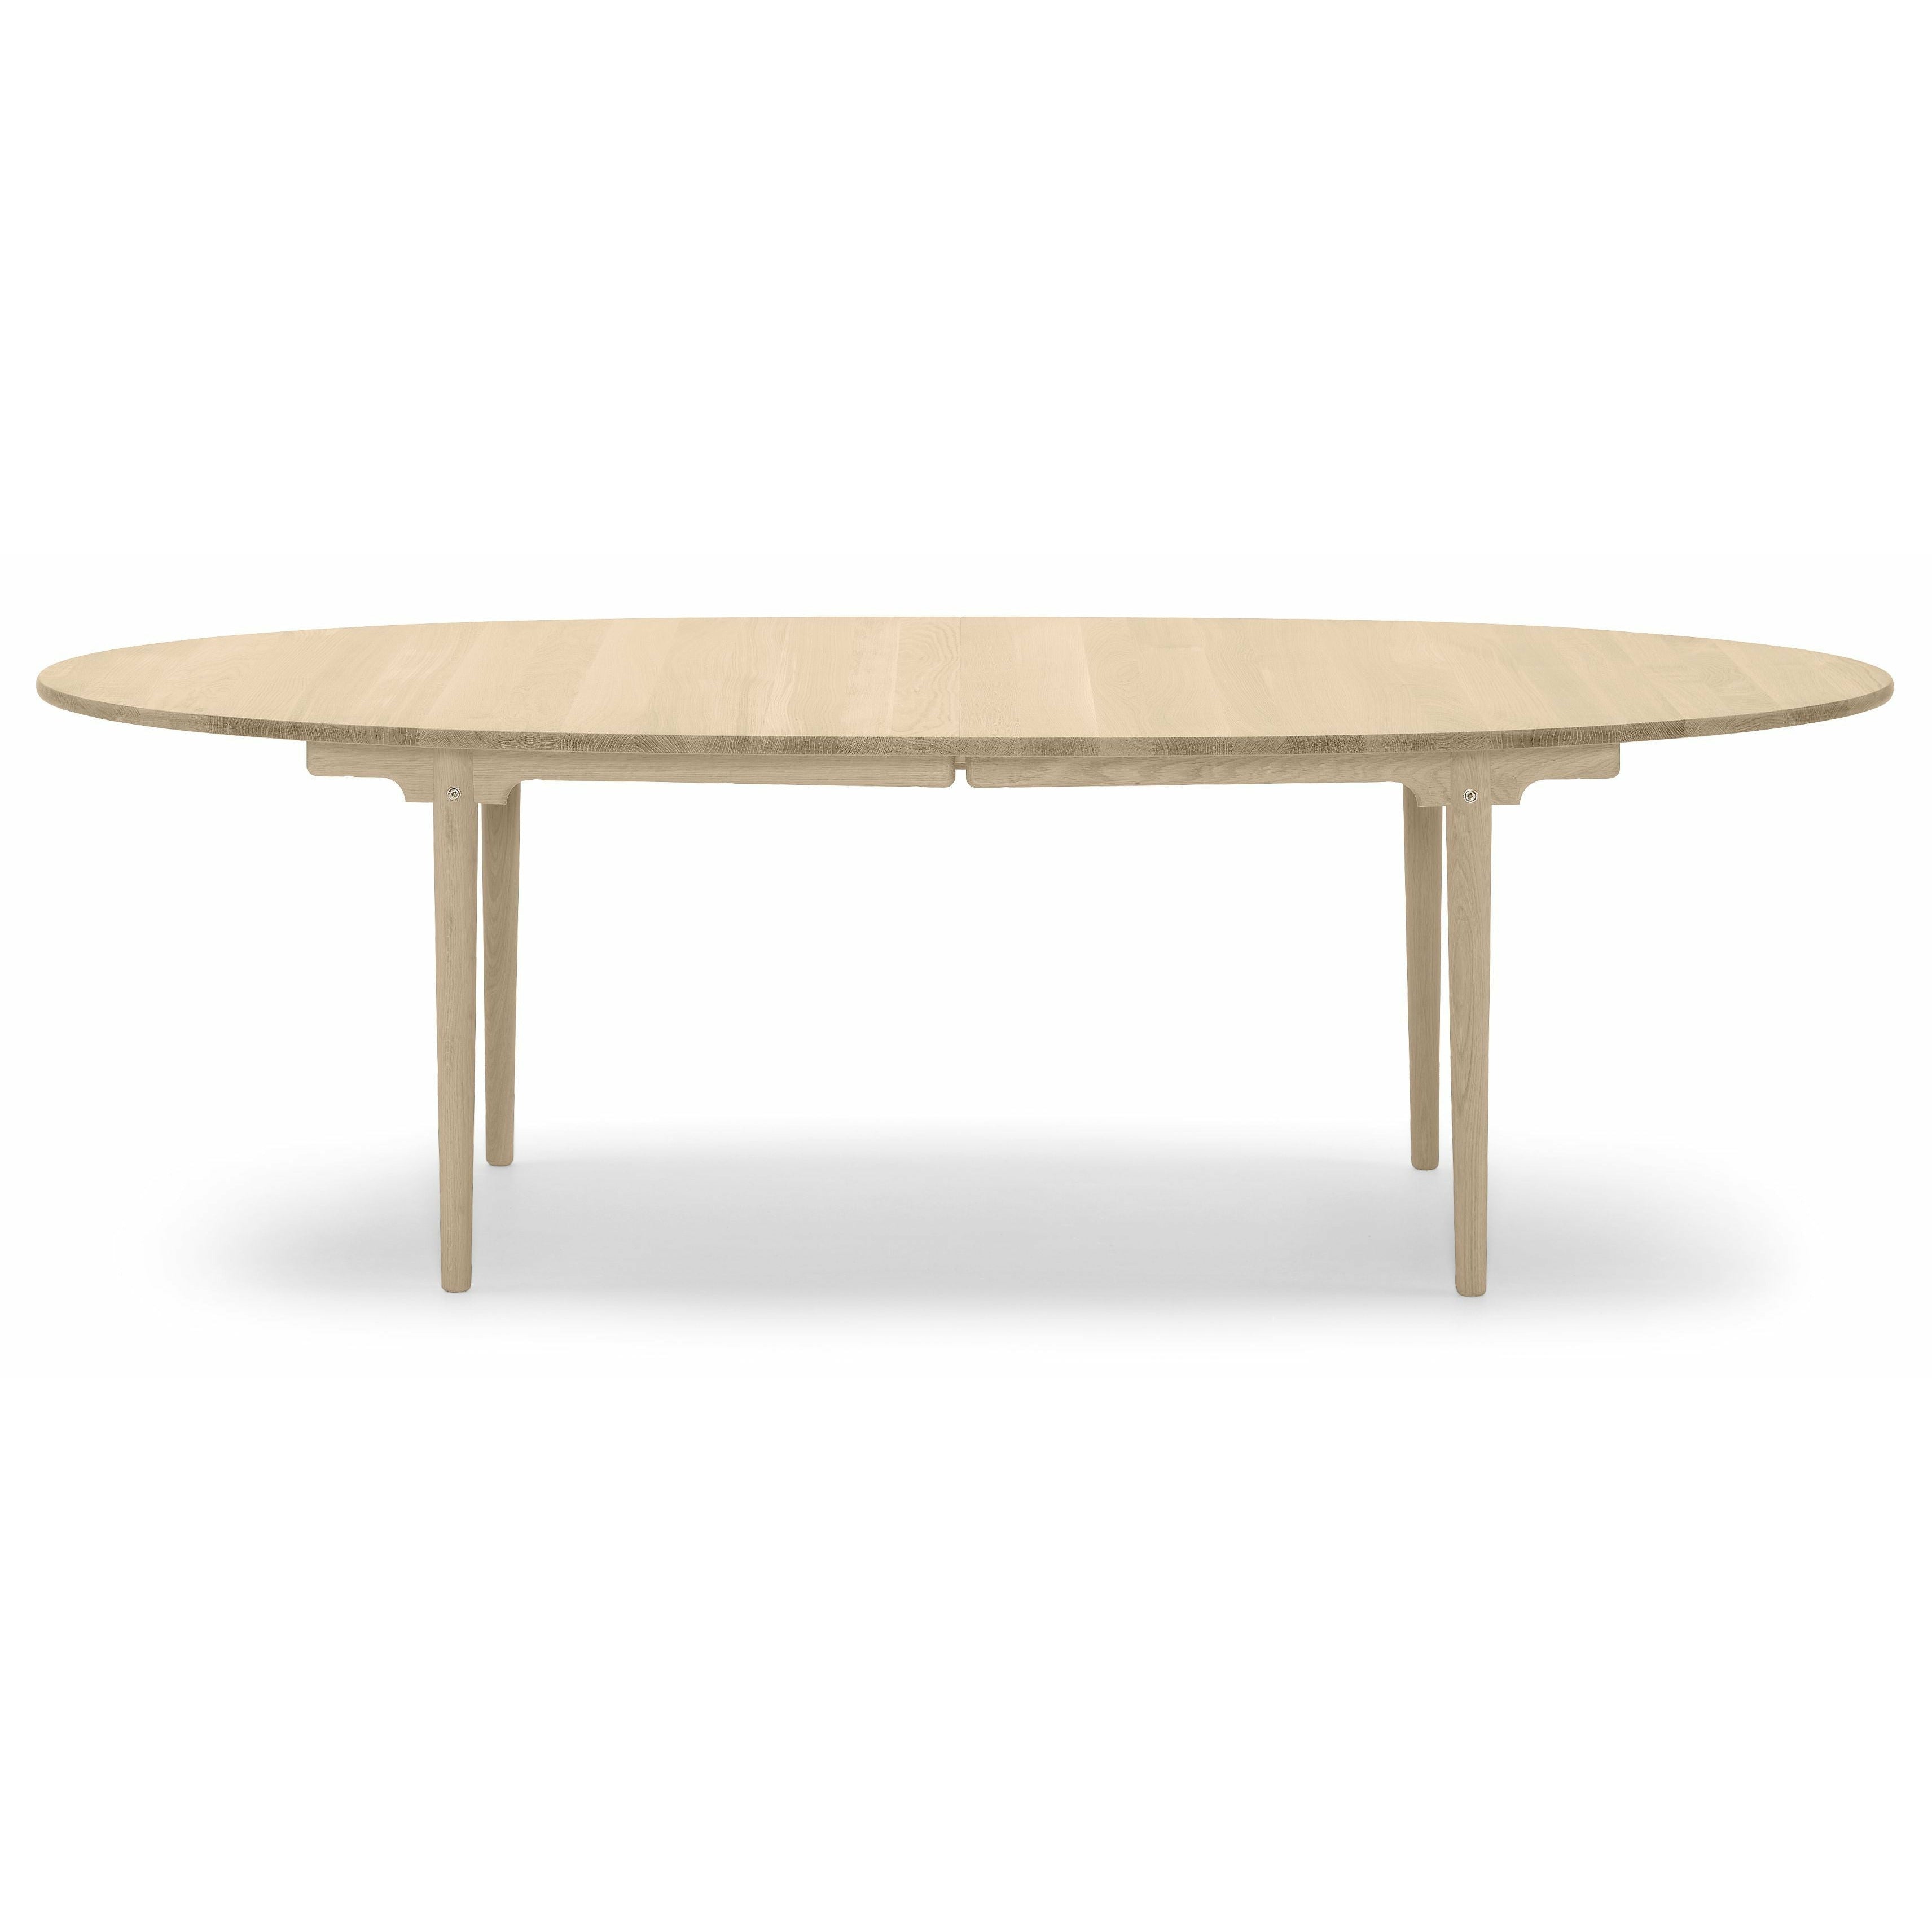 Carl Hansen Ch339 Dining Table Designed For 4 Pull Out Plates, Oak Oiled